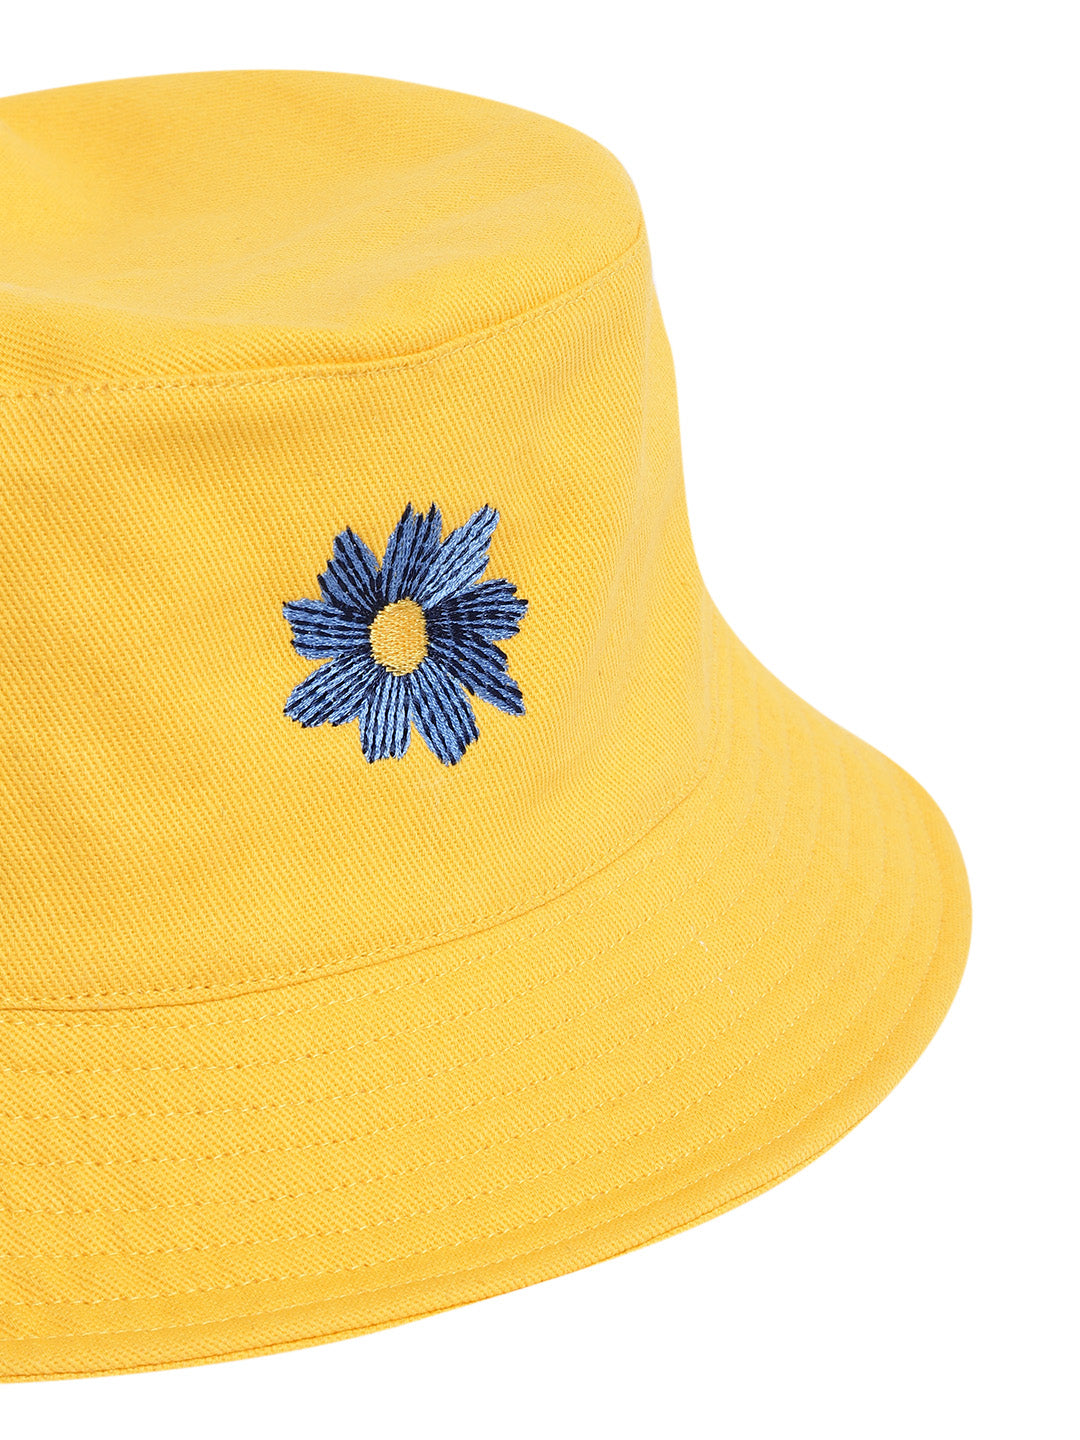 Blueberry yellow flower Reversible Embroidered bucket hat